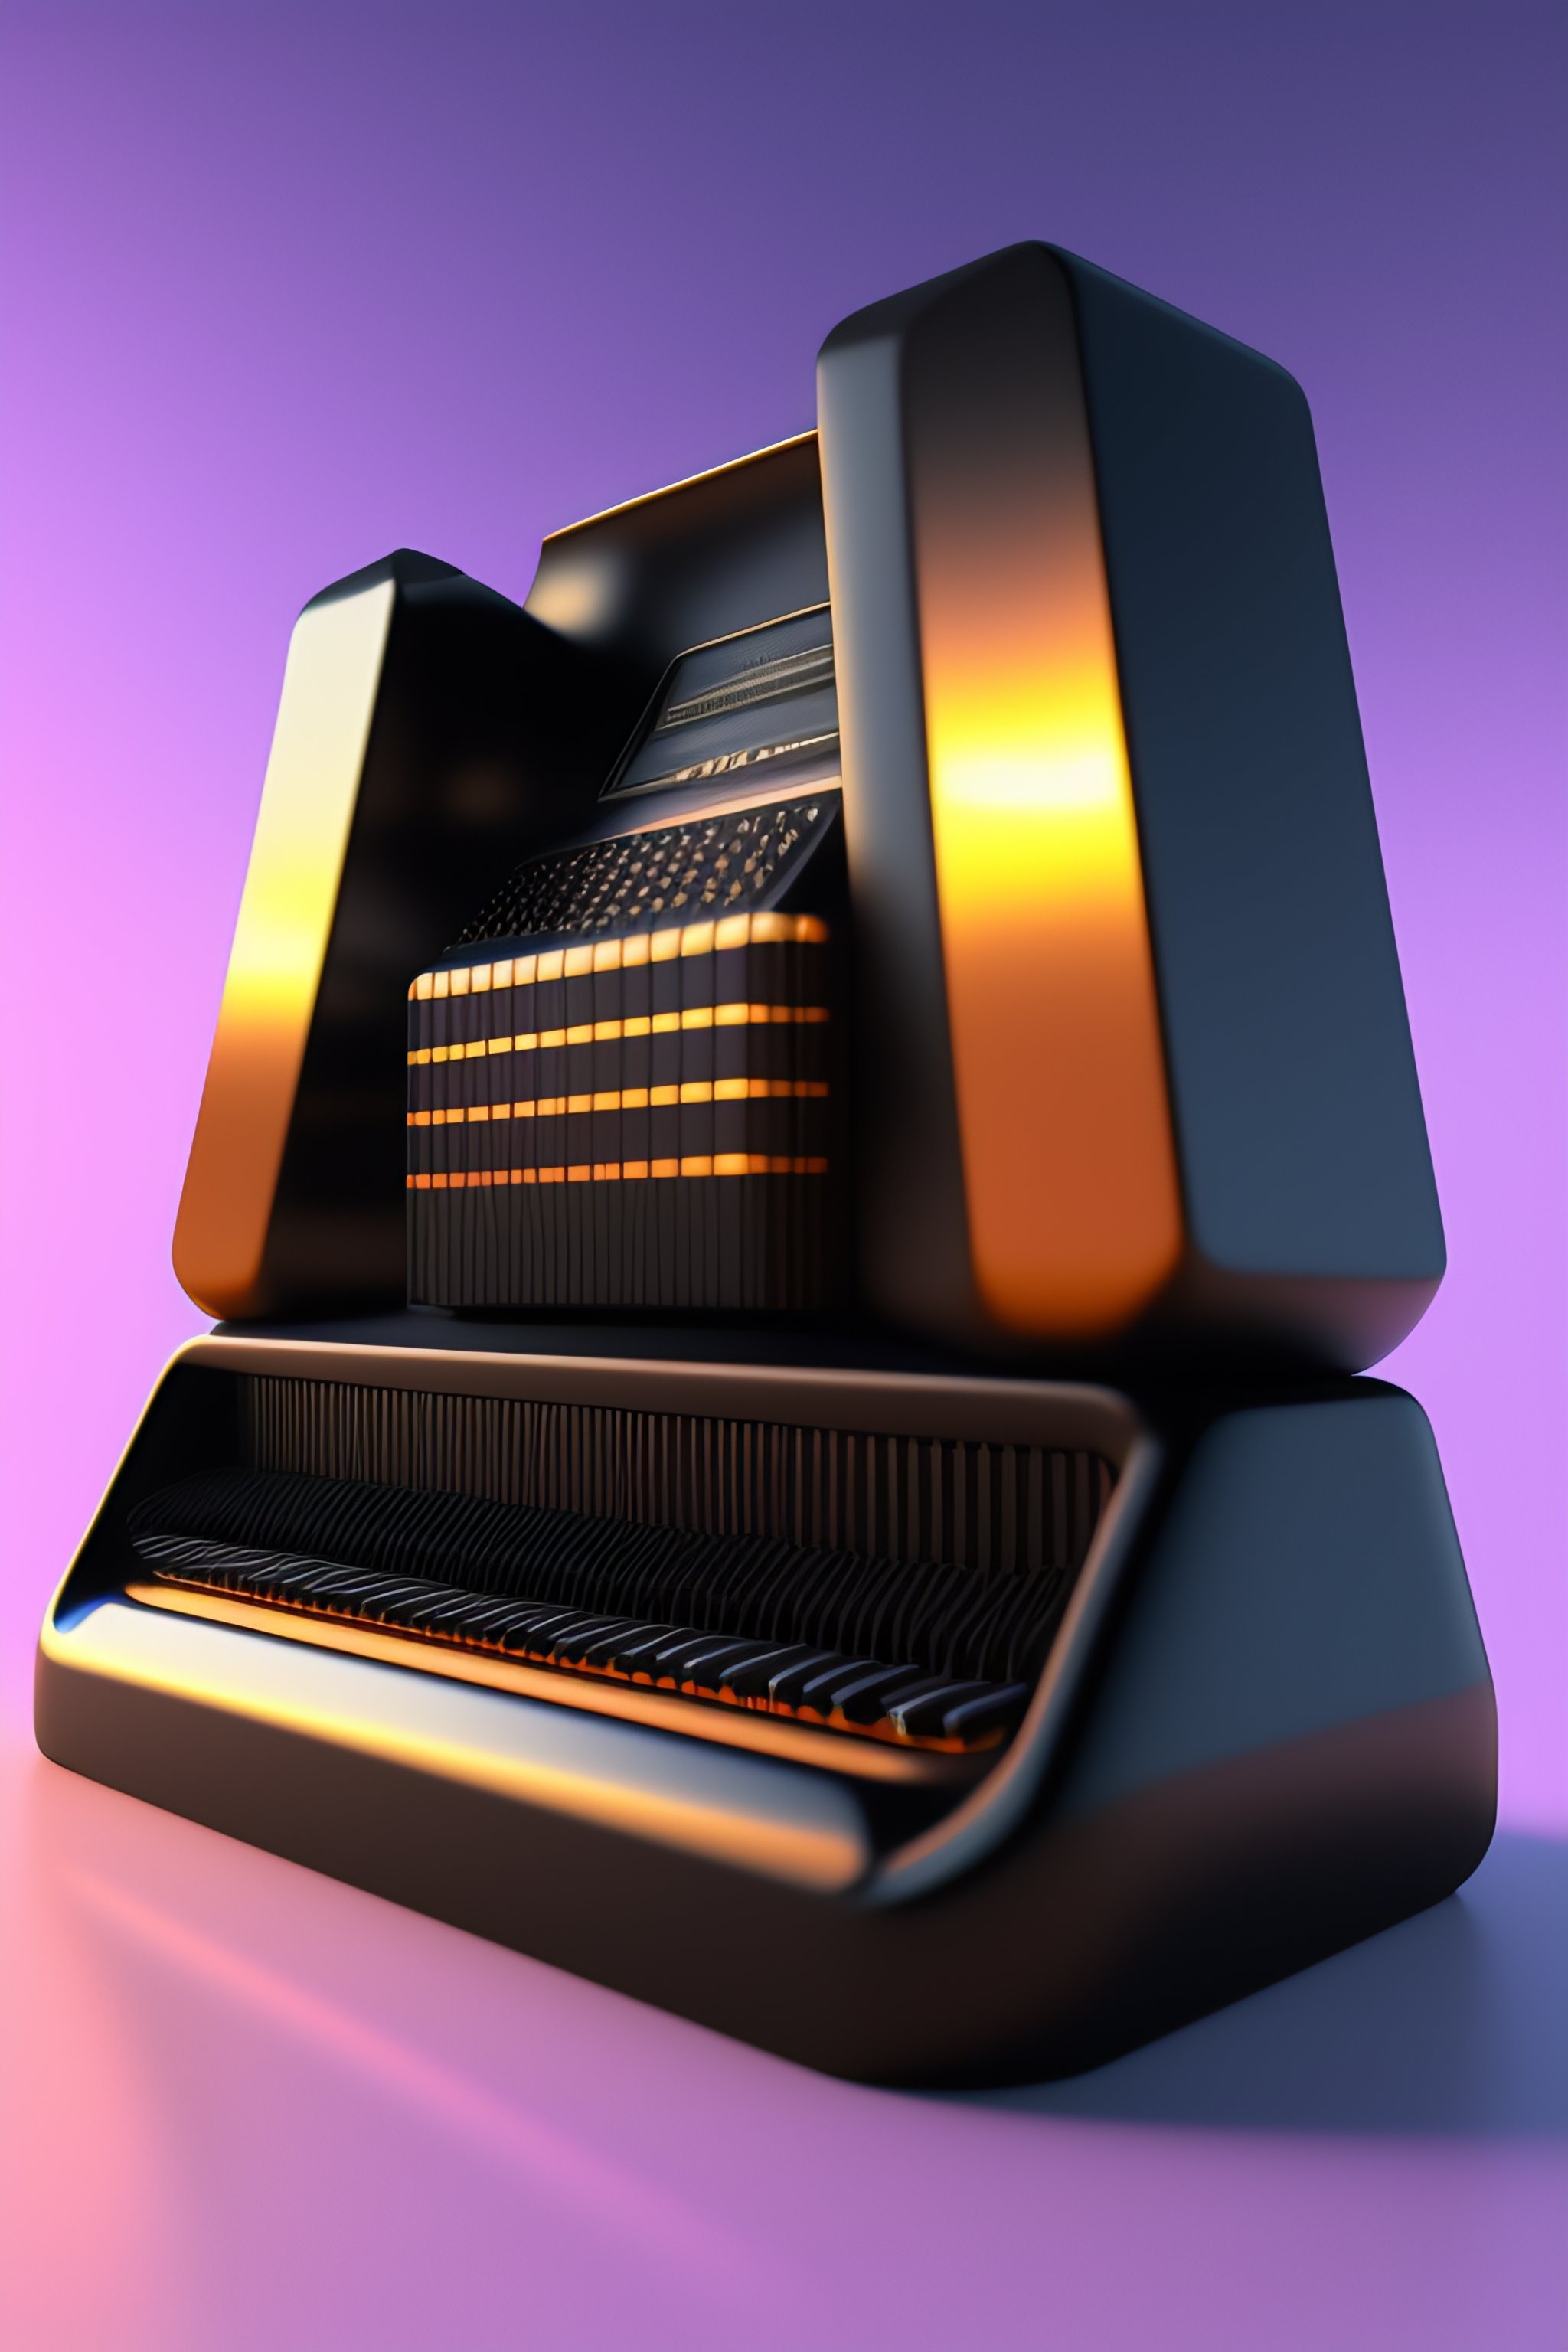 Lexica - Poly music piano keyboard, 3d isometric rendering